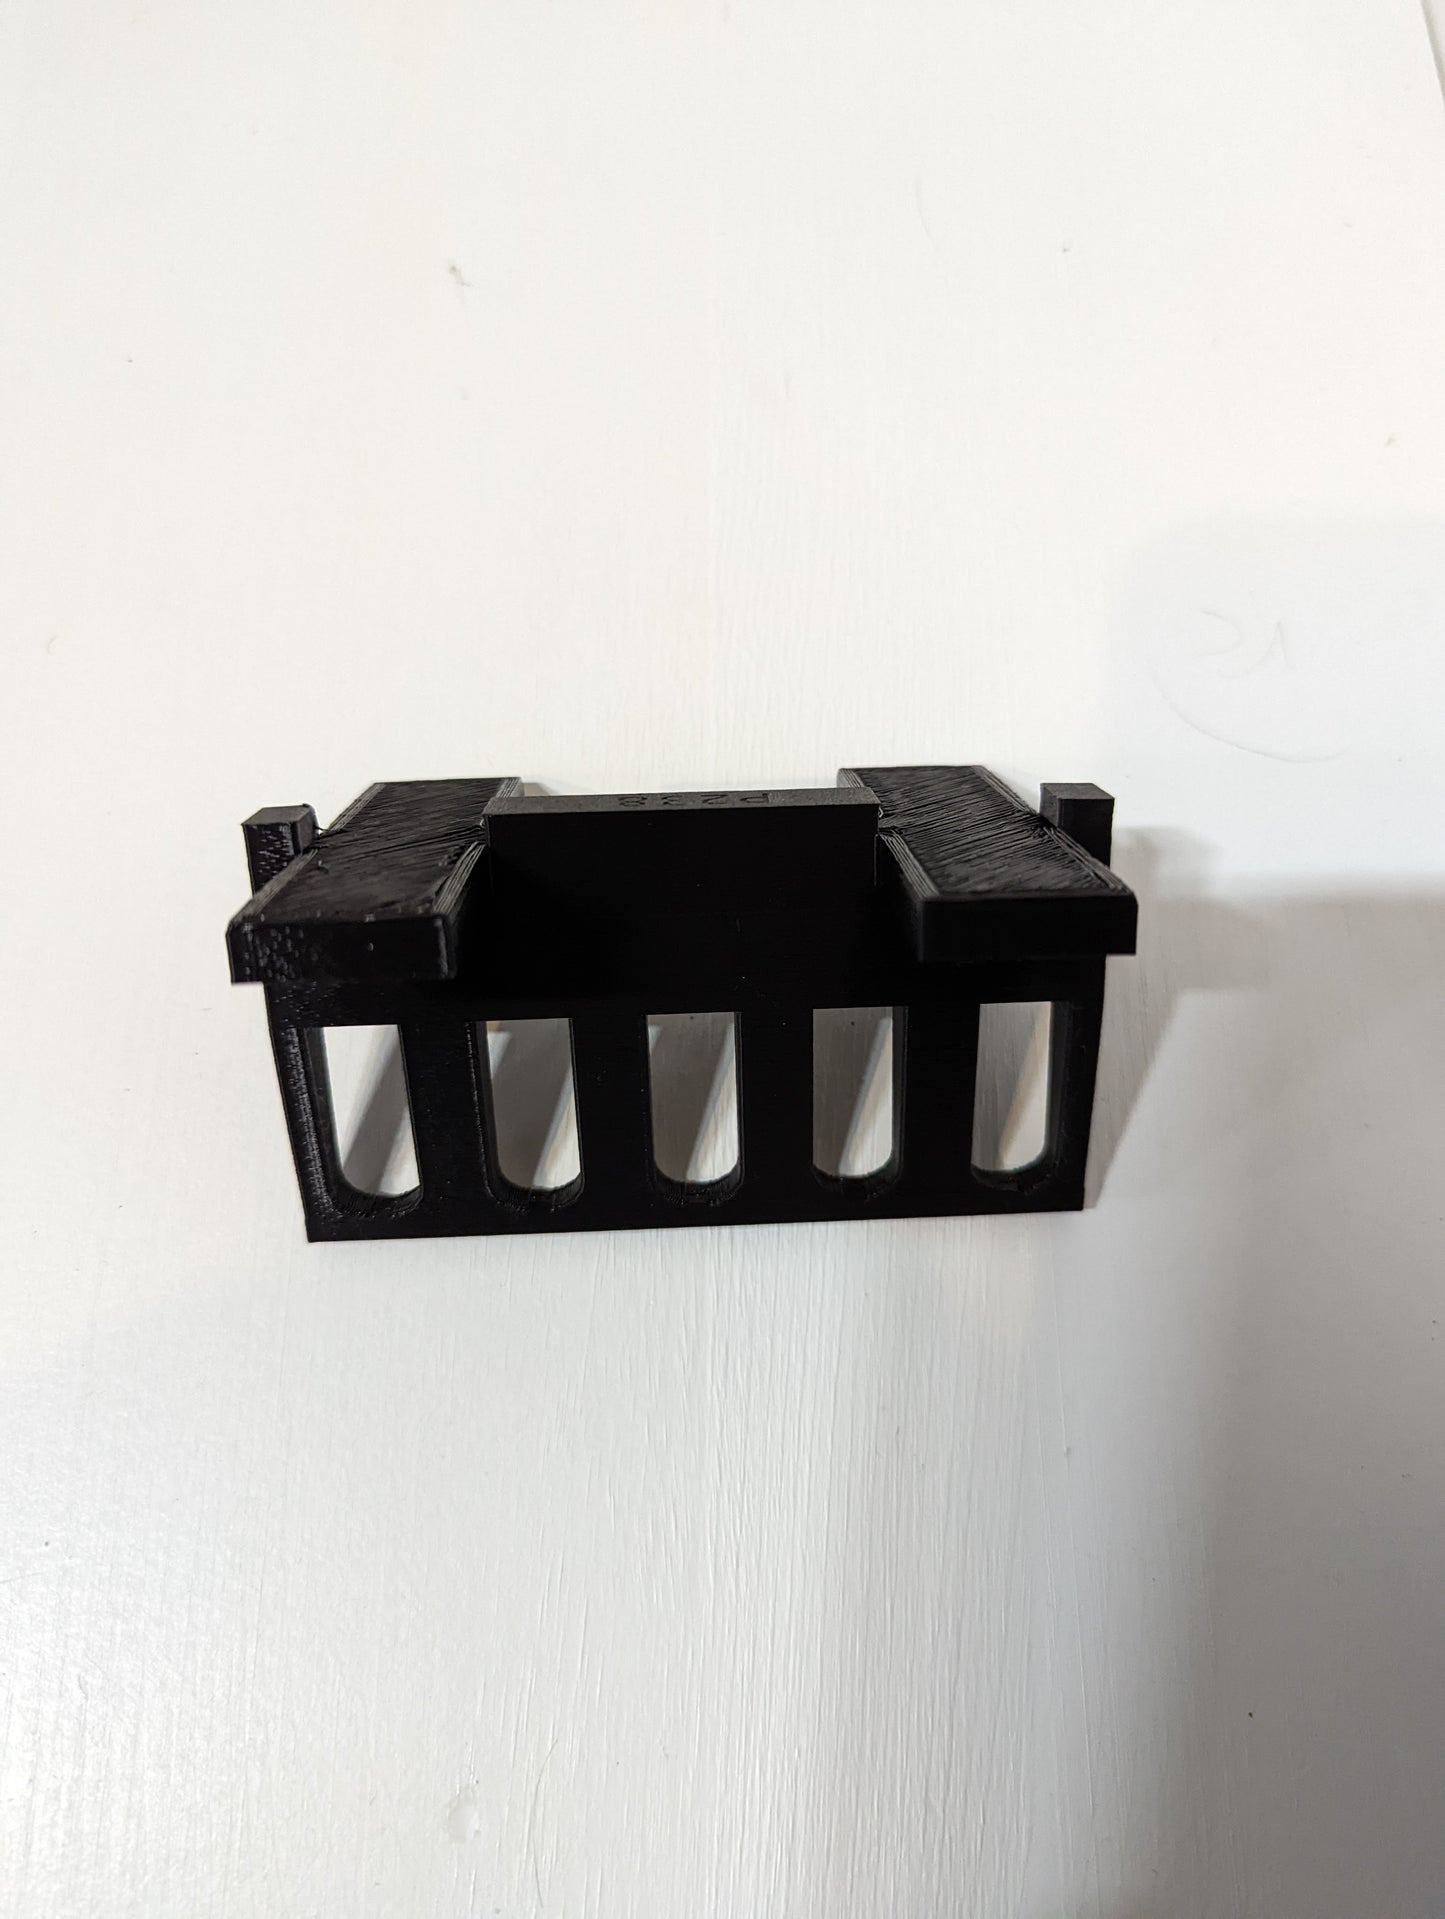 Mount for Sig P238 Mags - Command Strips | Magazine Holder Storage Rack